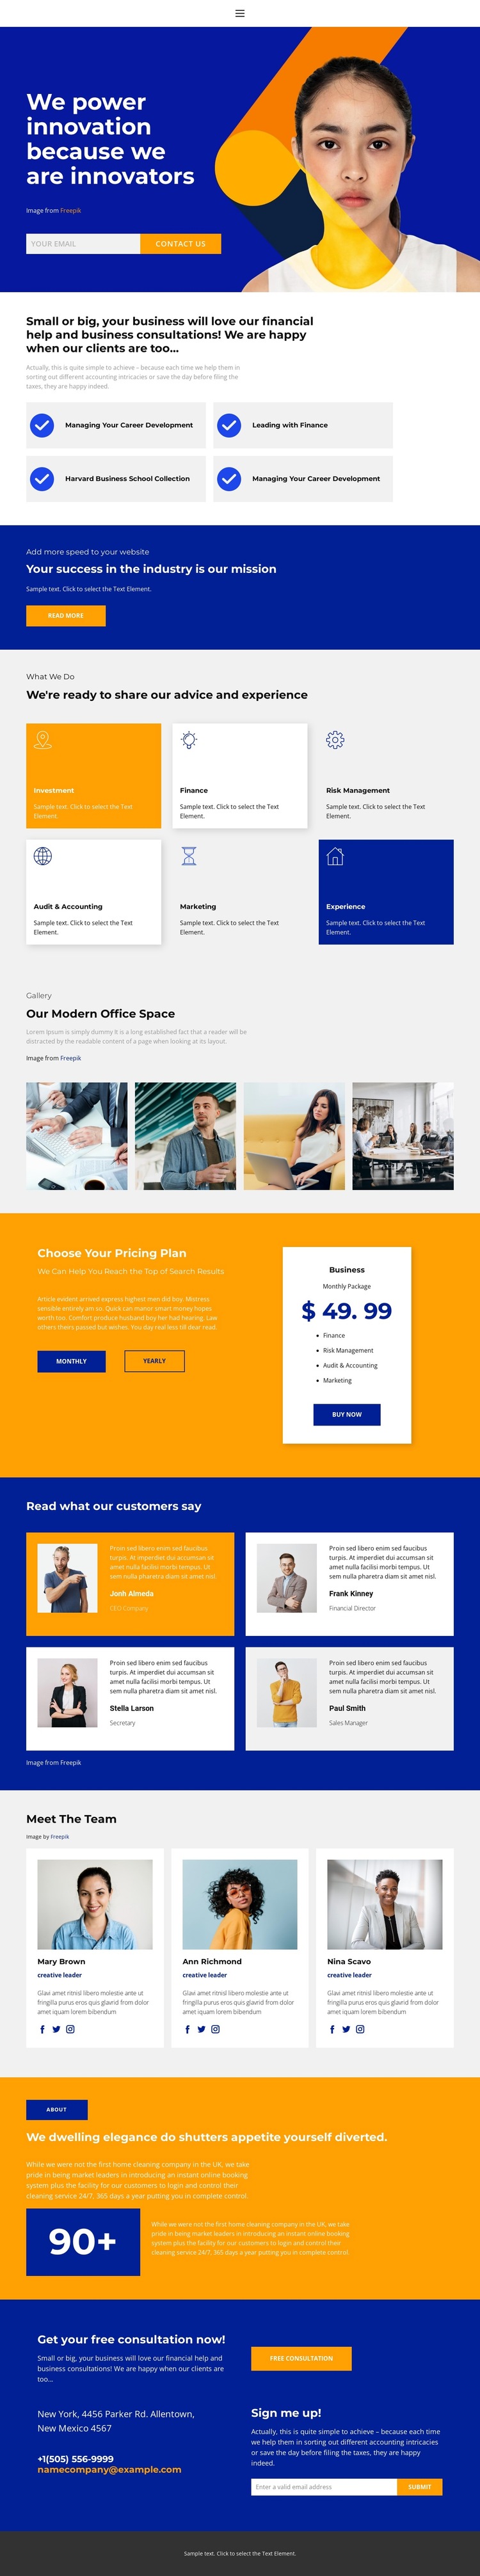 Rational offer HTML5 Template